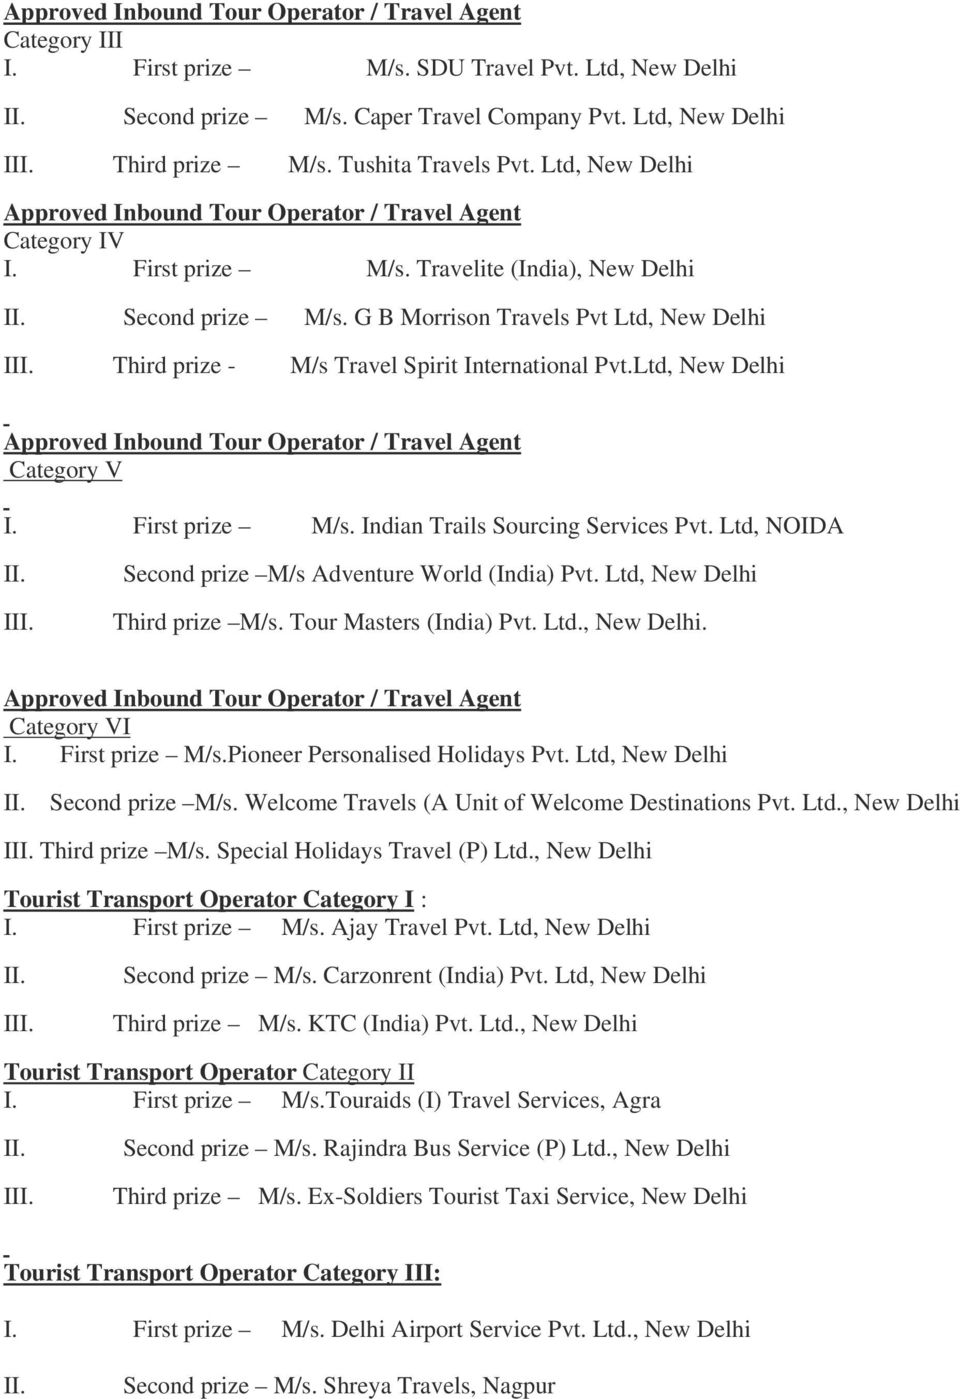 First prize M/s. Indian Trails Sourcing Services Pvt. Ltd, NOIDA I Second prize M/s Adventure World (India) Pvt. Ltd, New Delhi Third prize M/s. Tour Masters (India) Pvt. Ltd., New Delhi. Category VI I.